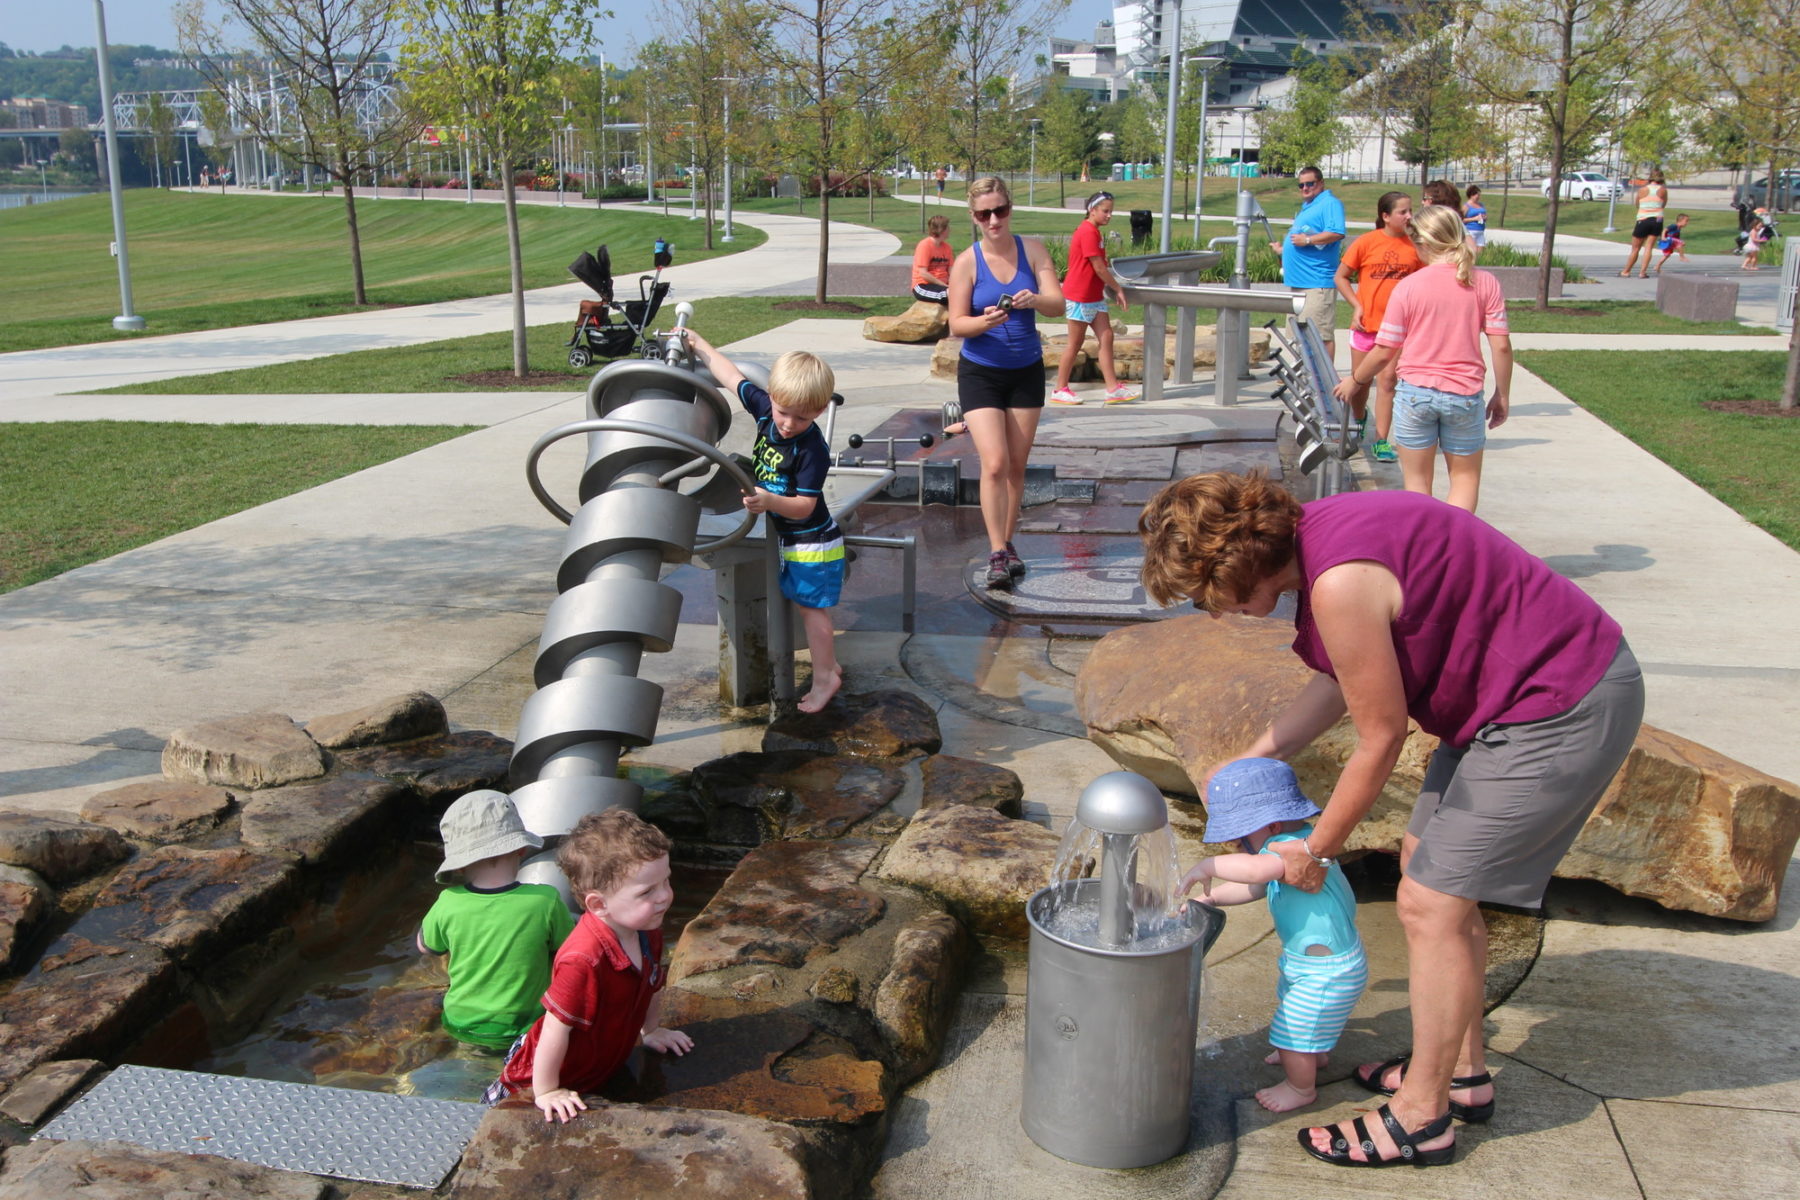 Children play with water features